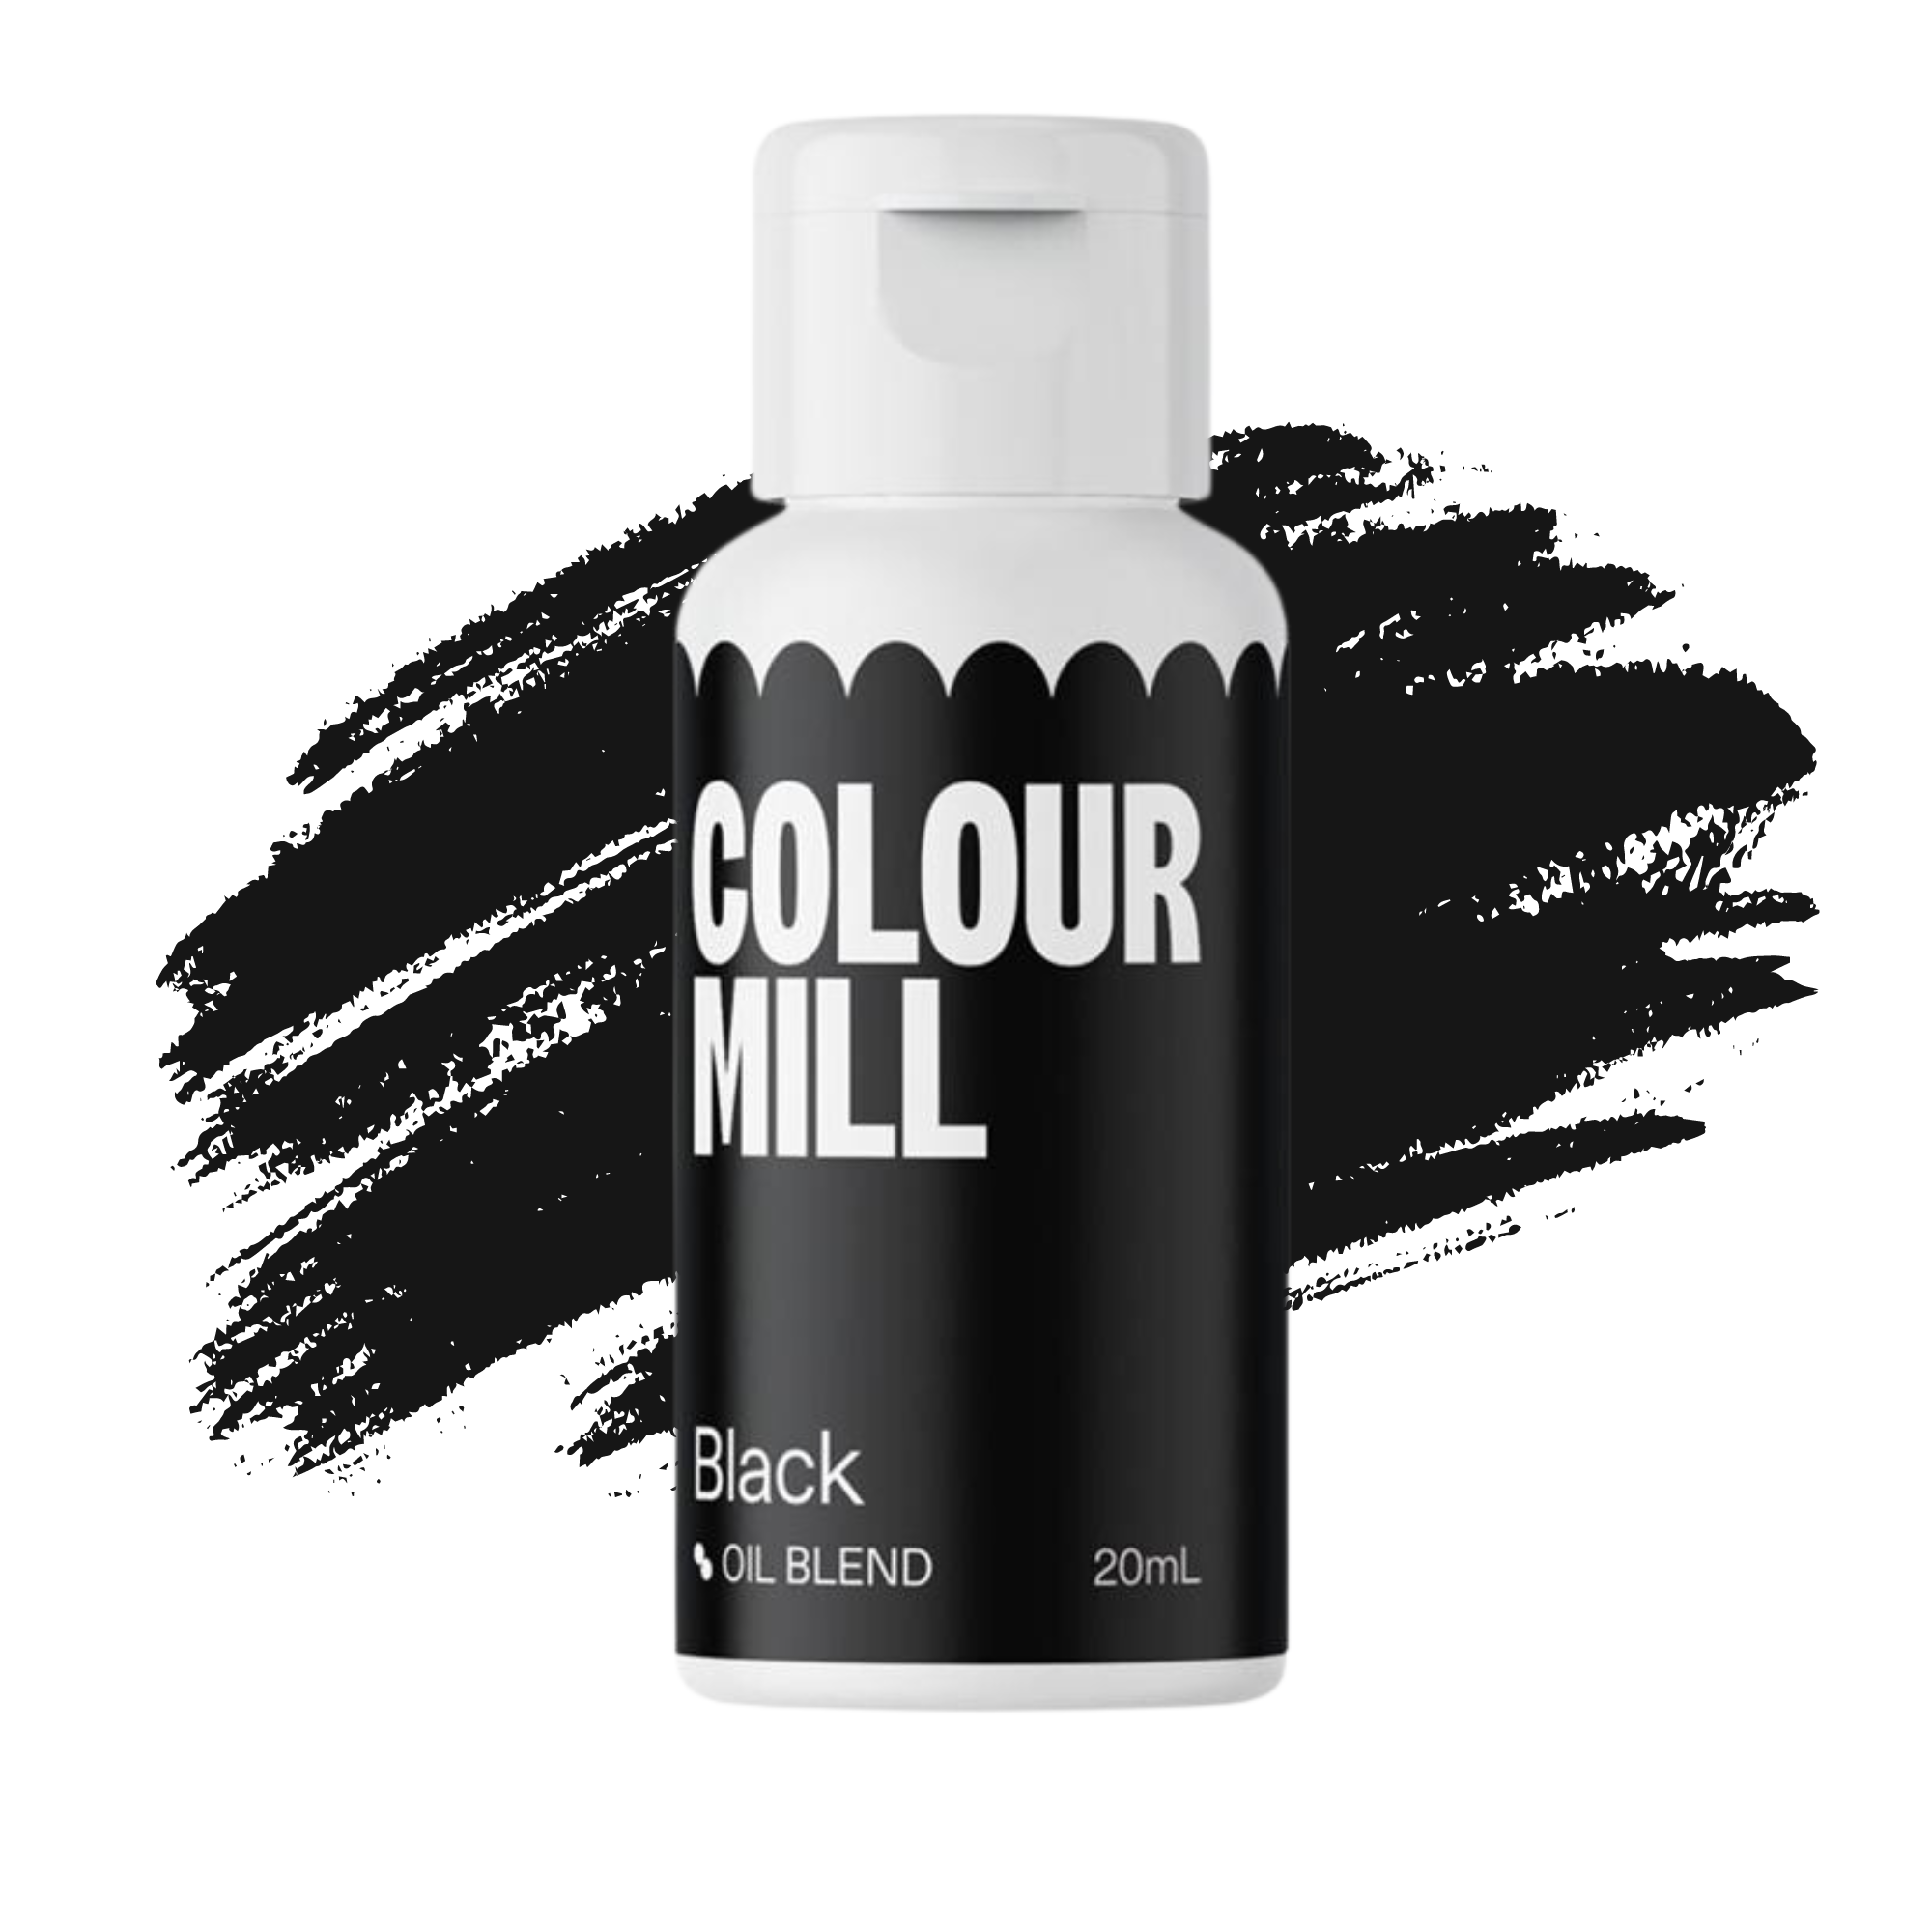 Colour Mill Black Food Colouring (Oil Based)